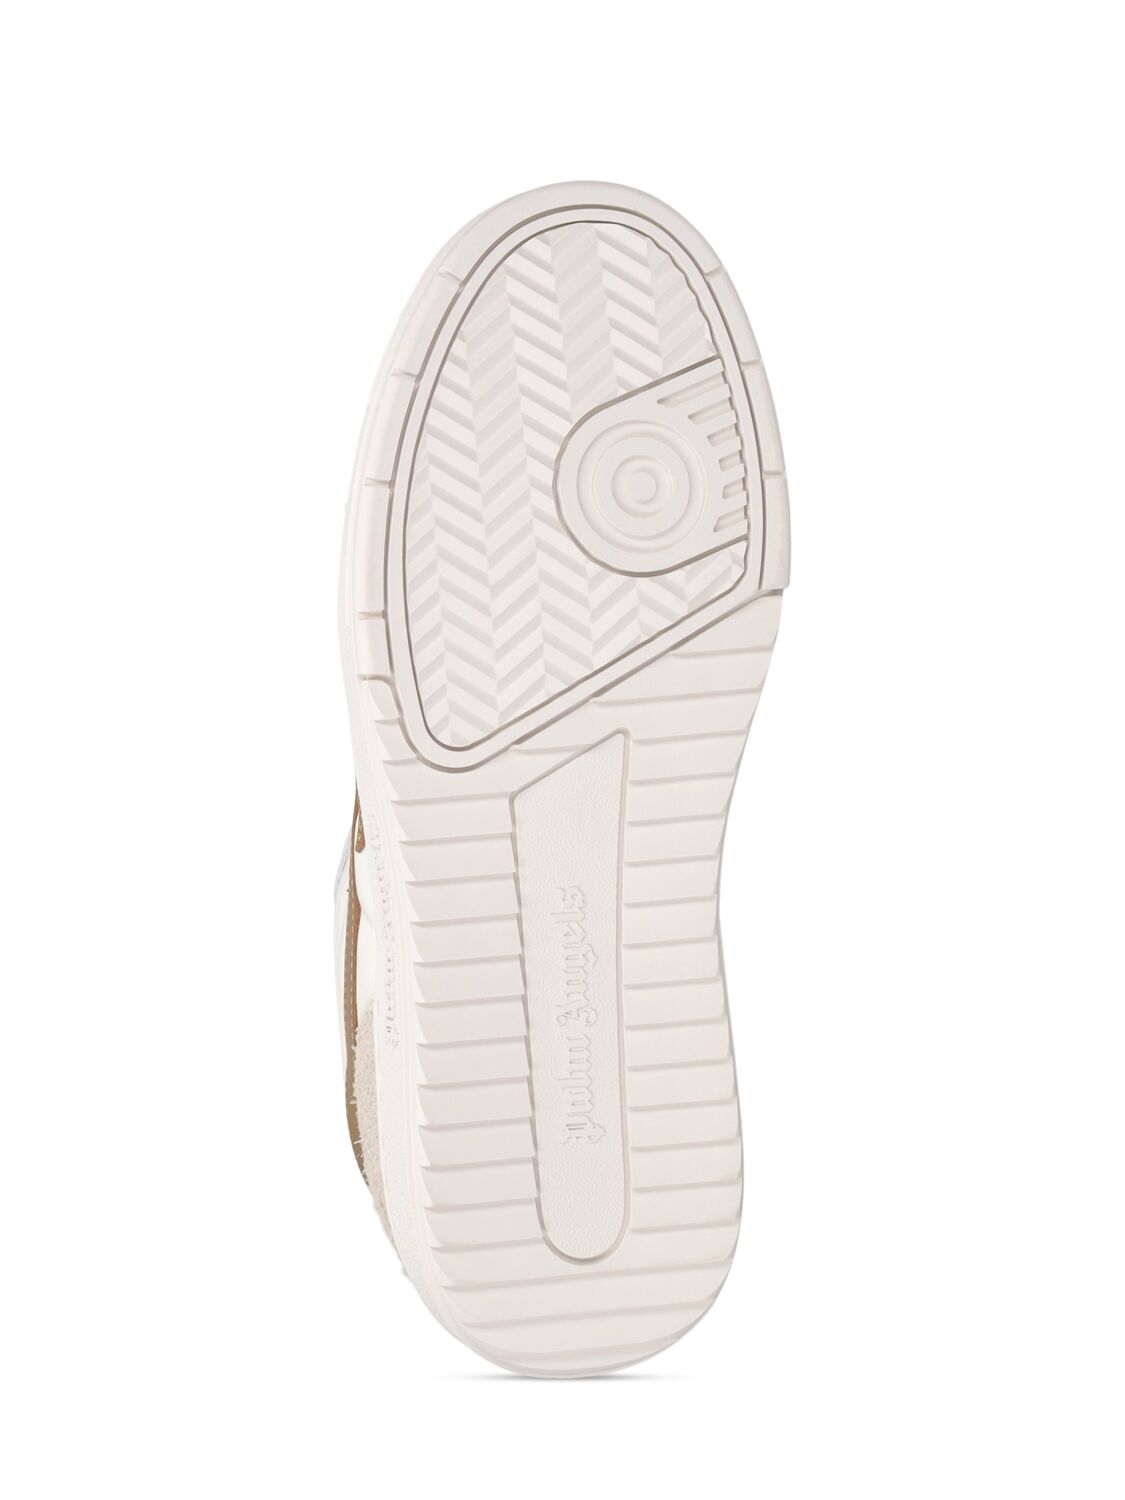 Shop Palm Angels Palm Beach University Leather Sneakers In White,gold